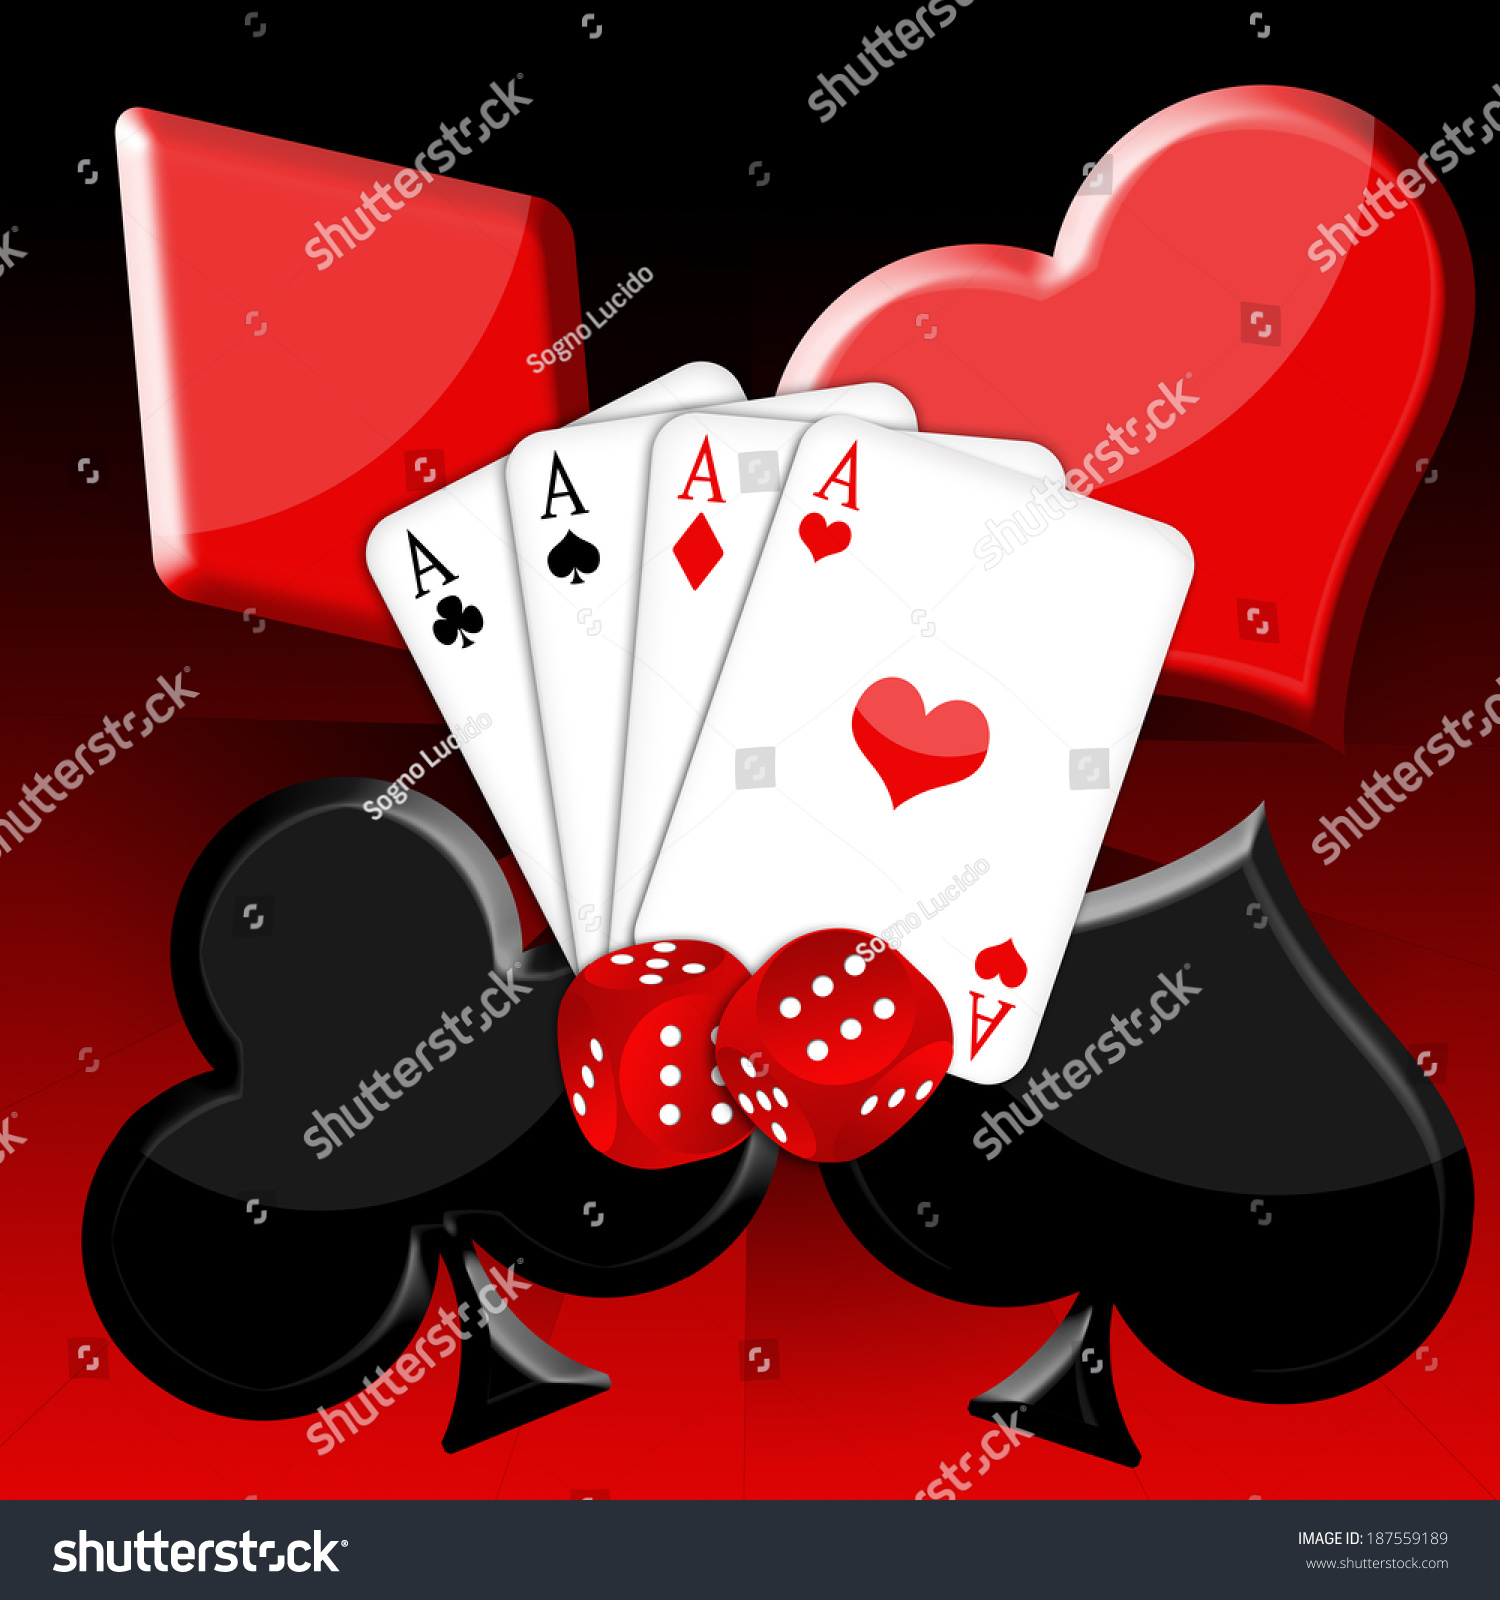 Edit Vectors Free Online - Playing cards | Shutterstock Editor